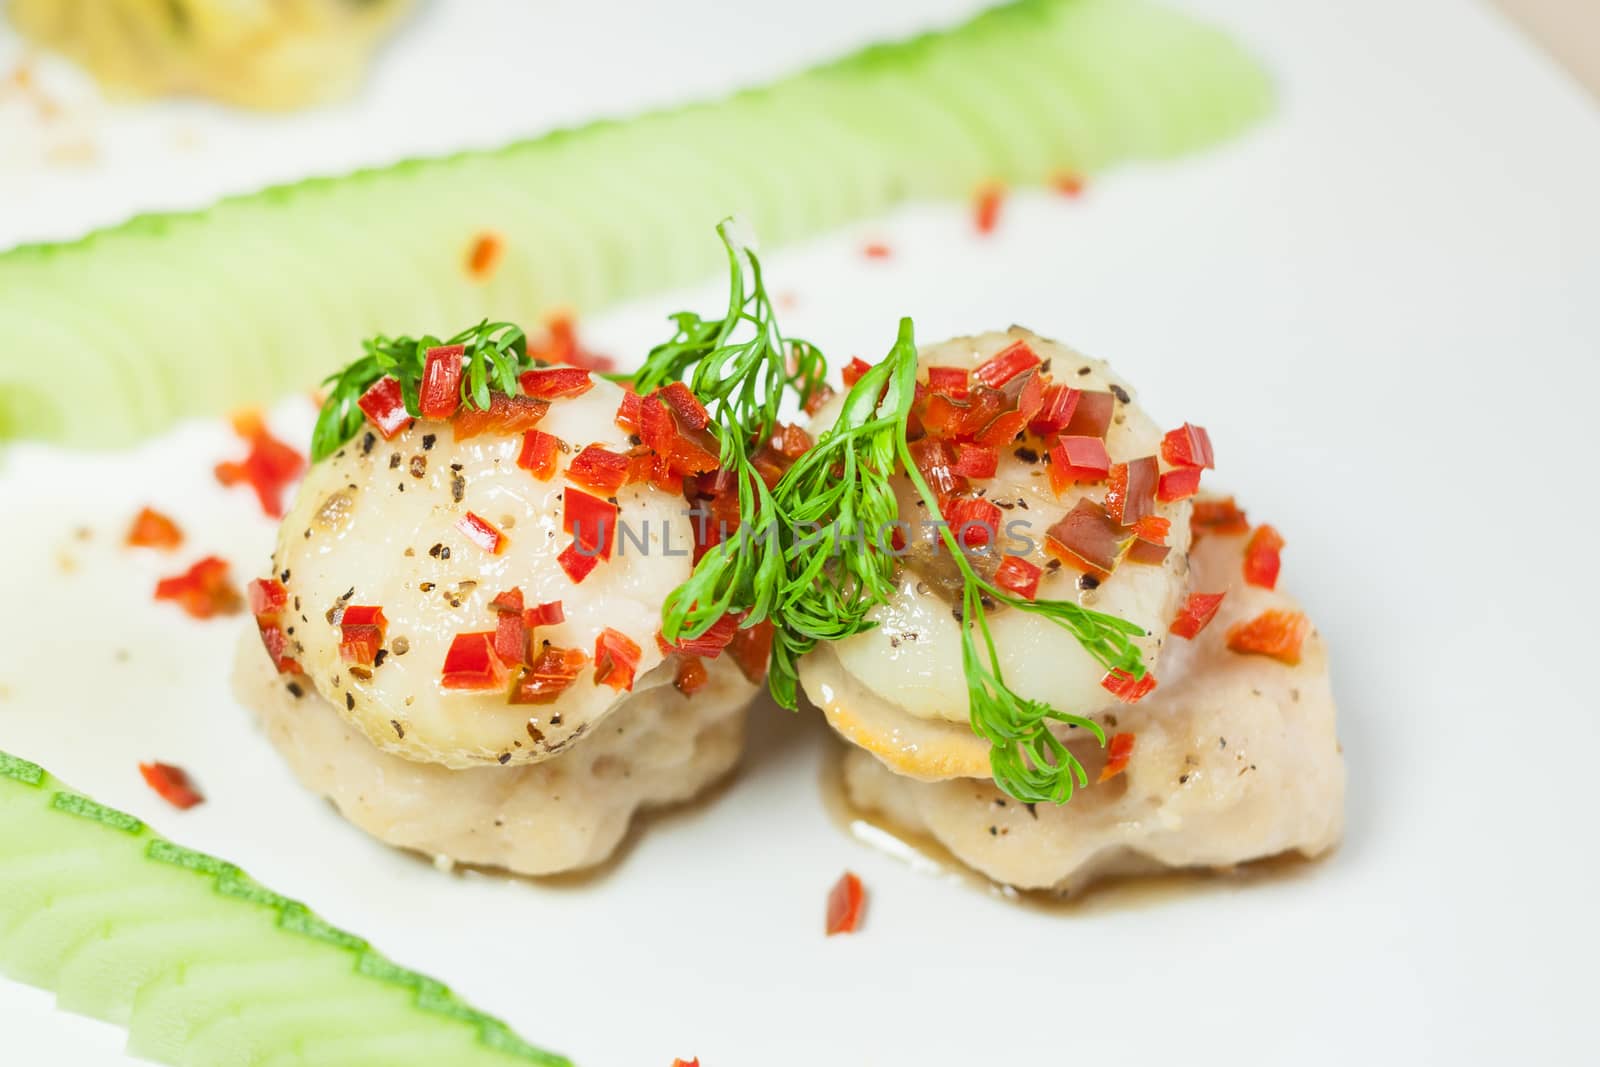 Scallop sprinkled with chili chopped and coriander.